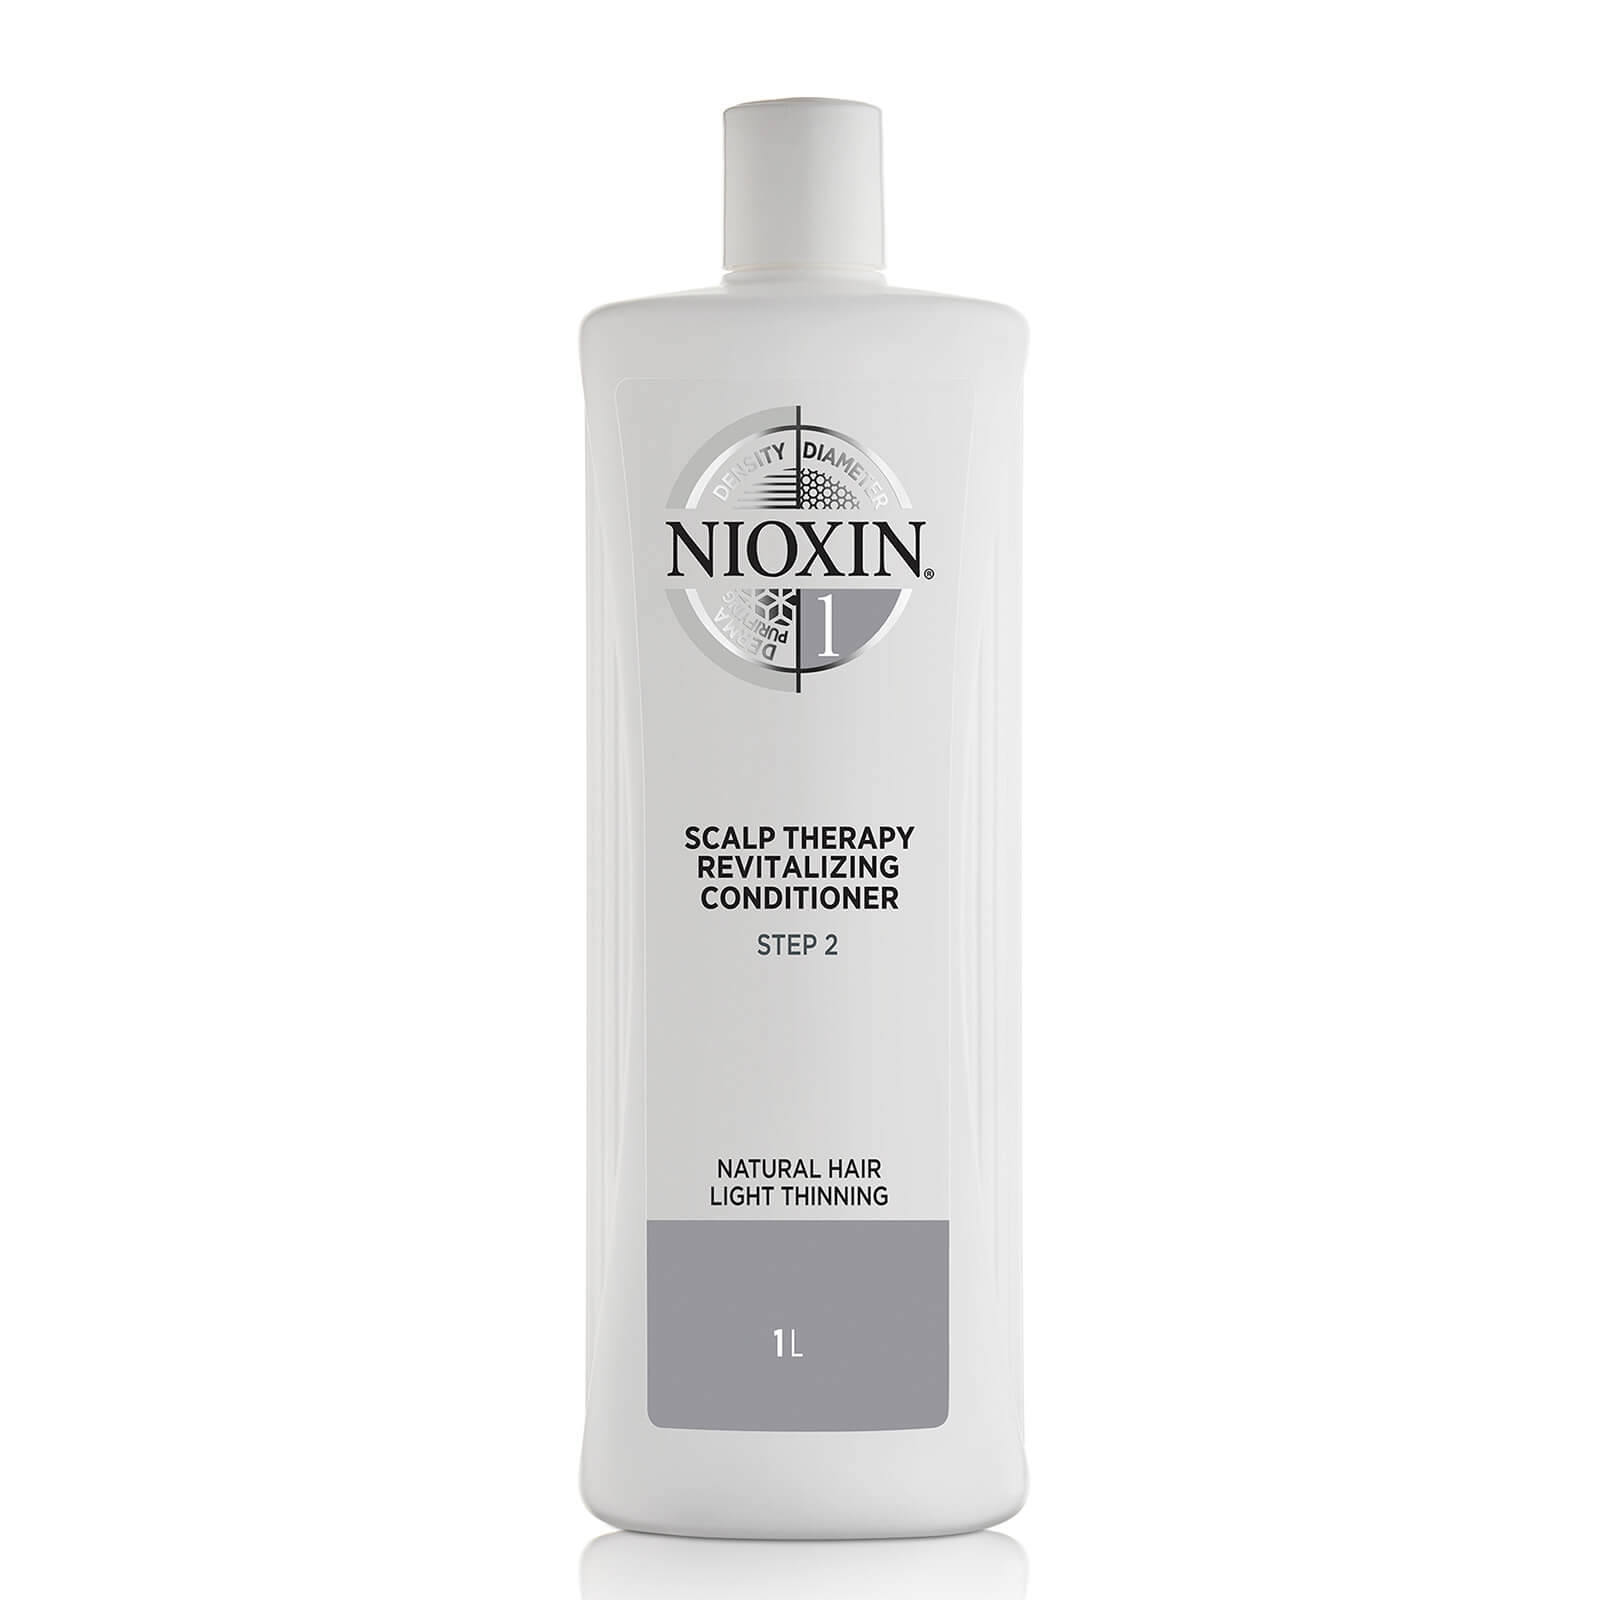 NIOXIN 3-Part System 1 Scalp Therapy Revitalizing Conditioner for Natural Hair with Light Thinning 1